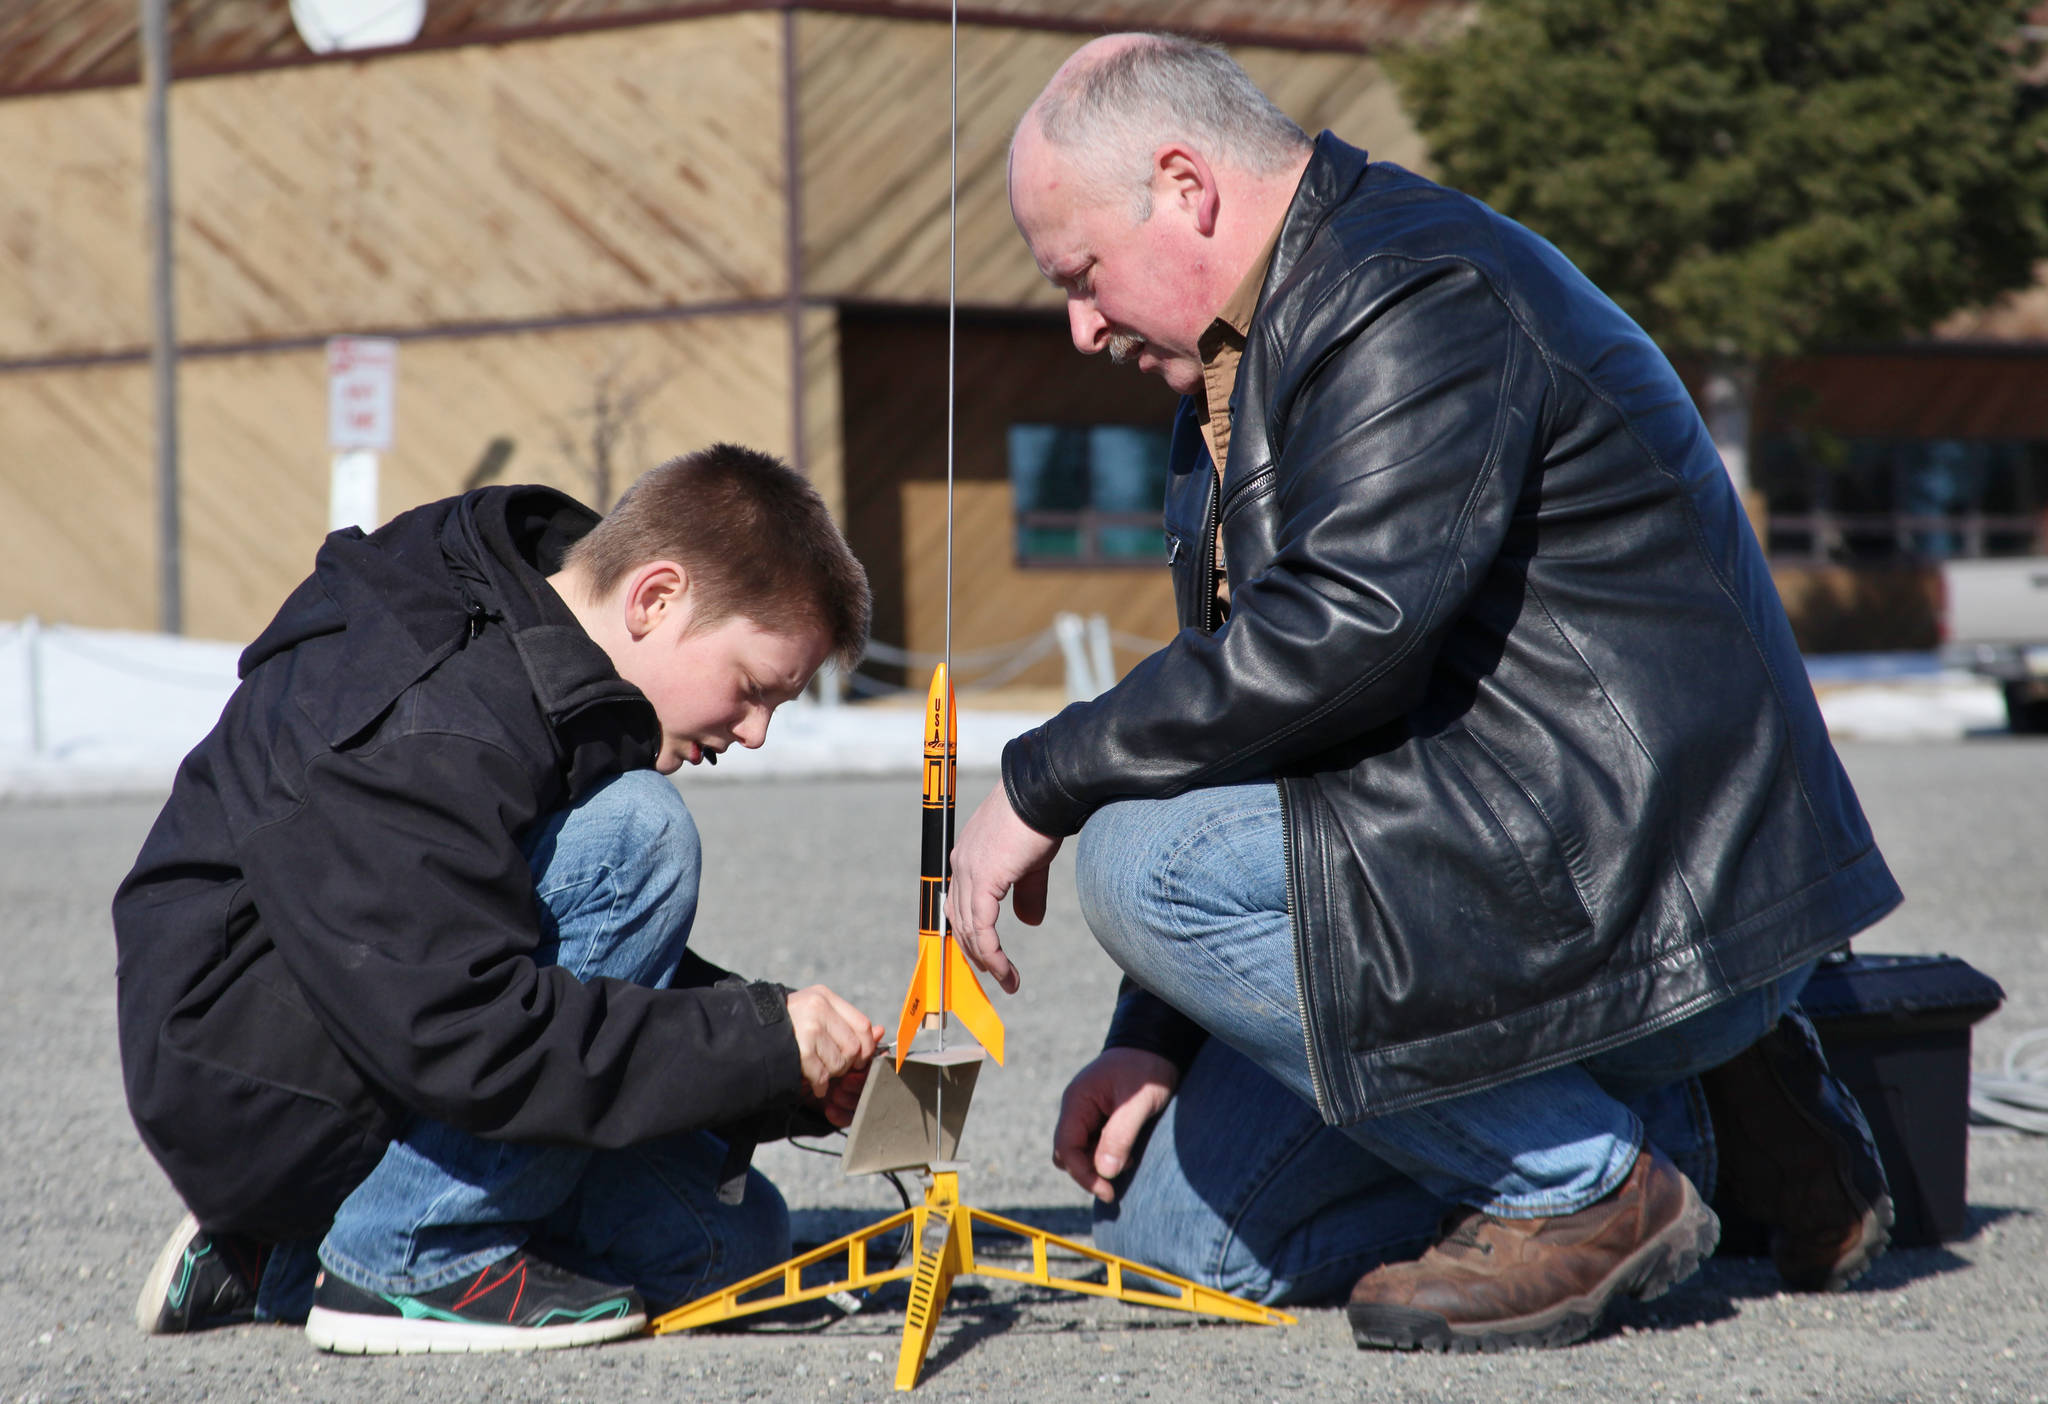 Asa Lorentzen (left) clips wires to ignition contacts while model rocketry instructor Scott Aleckson observes in the parking lot of the Soldotna Regional Sports Complex in Soldotna, Alaska on Saturday, May 31, 2018. Aleckson said he made and launched his first plastic, balsa wood, and cardboard rocket as a 4th grade student at Soldotna Elementary School. Since then he’s built a custom launch system, he said, “with recycled electronics and a lot of soldering time.” Aleckson taught Saturday’s rocketry class through the Soldotna Community Schools program, and would like to continue spreading the hobby. “If I could get a model rocket club going, that’d be great,” he said. “Stuff like this is much more fun in a group.” (Photo by Ben Boettger/Peninsula Clarion)